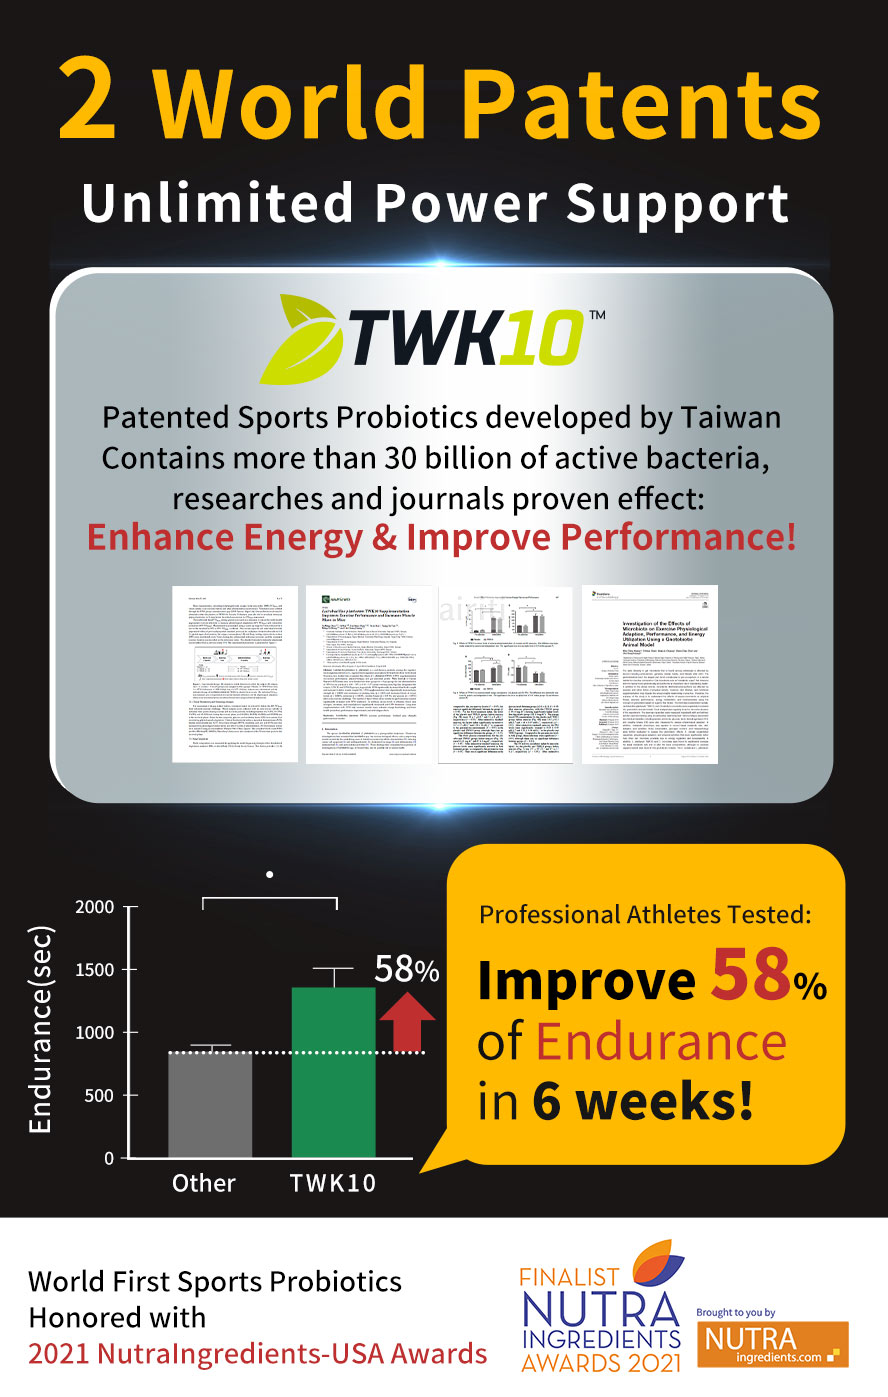 TWK10 is patented active lactic acid bacteira that can effectively improve 58% of endurance in 6 weeks